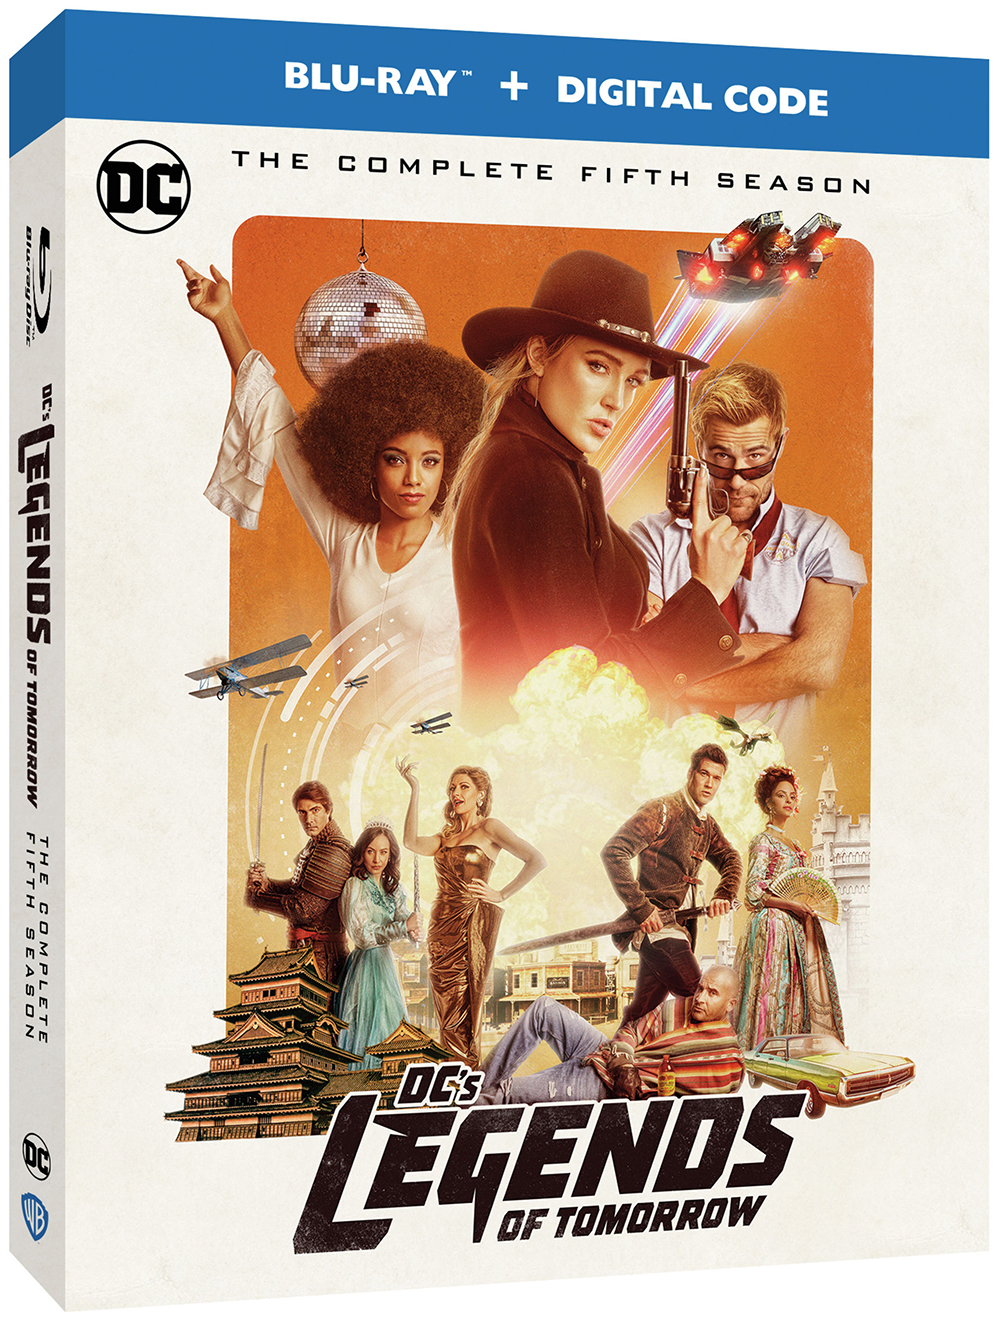 DCs Legends of Tomorrow: The Complete Fifth Season